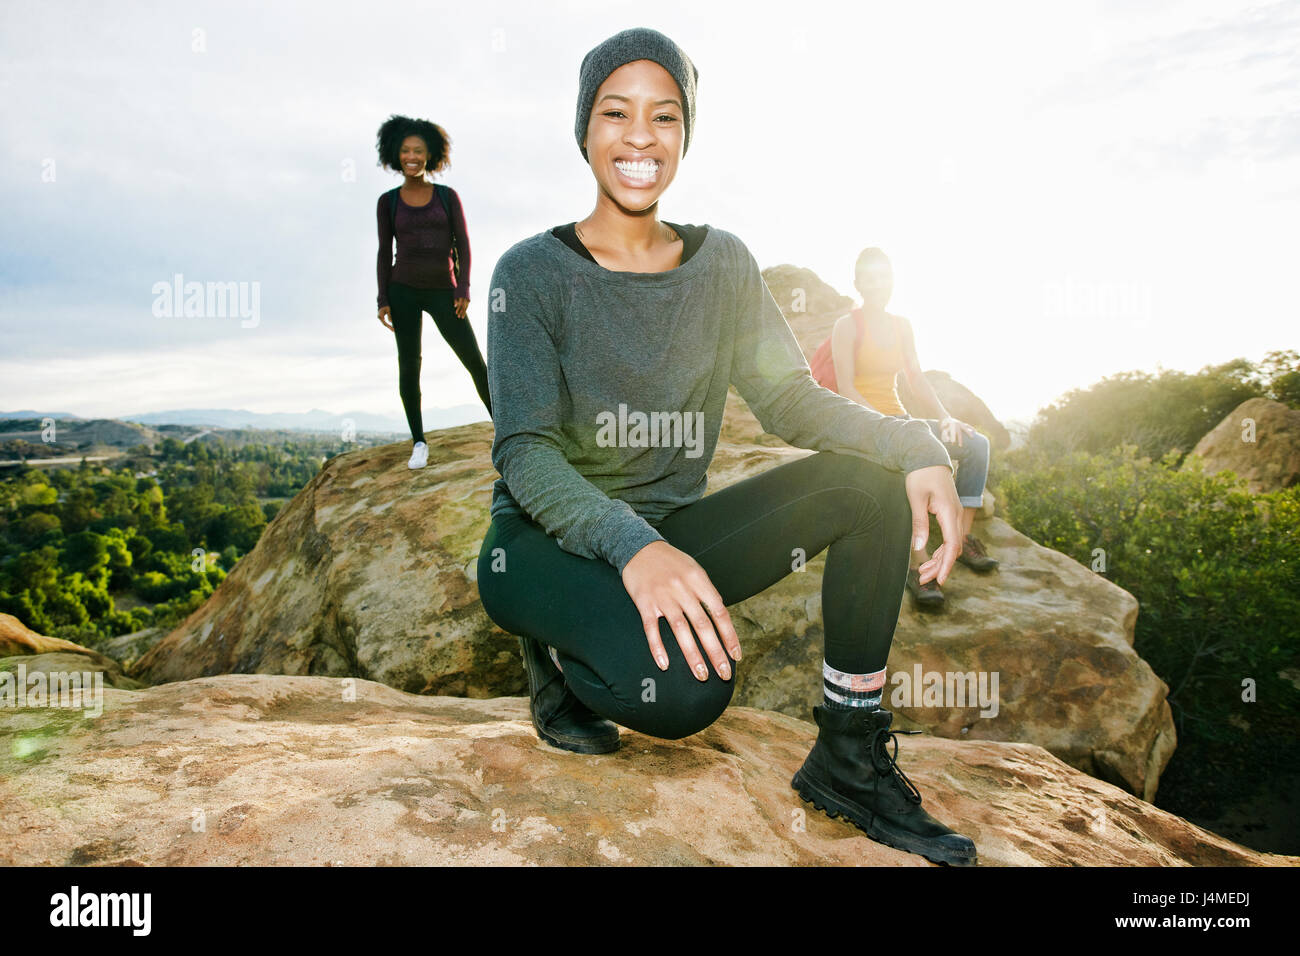 Portrait of smiling women posing on rock formation Banque D'Images